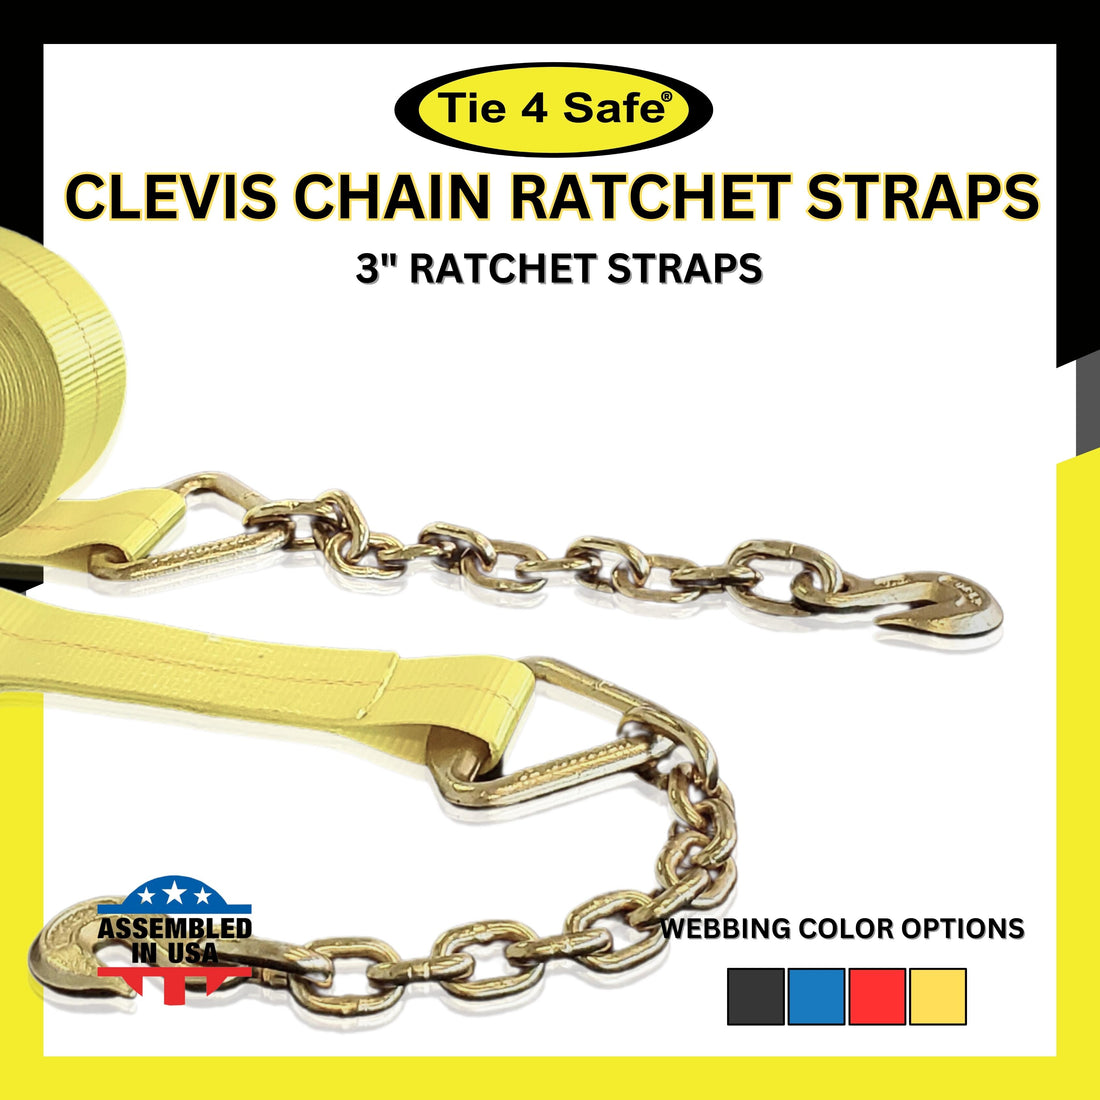 3" Ratchet Straps with Chain Extension